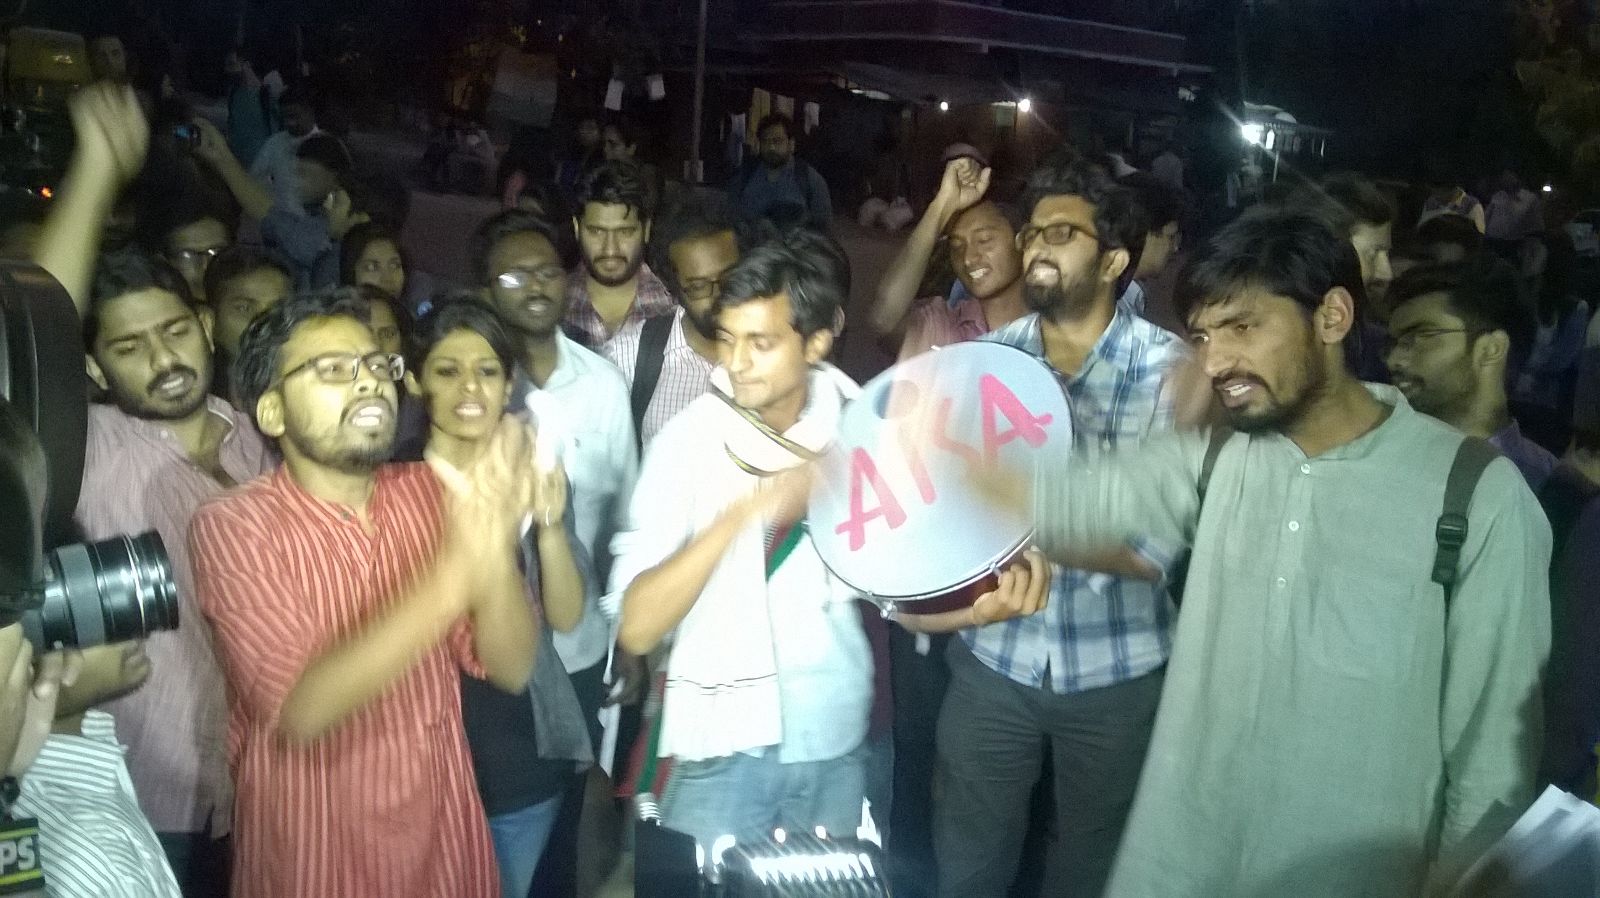 Joined By ABVP Leader, JNUâ€™s Students Burn Copy Of Manusmriti On Womenâ€™s Day